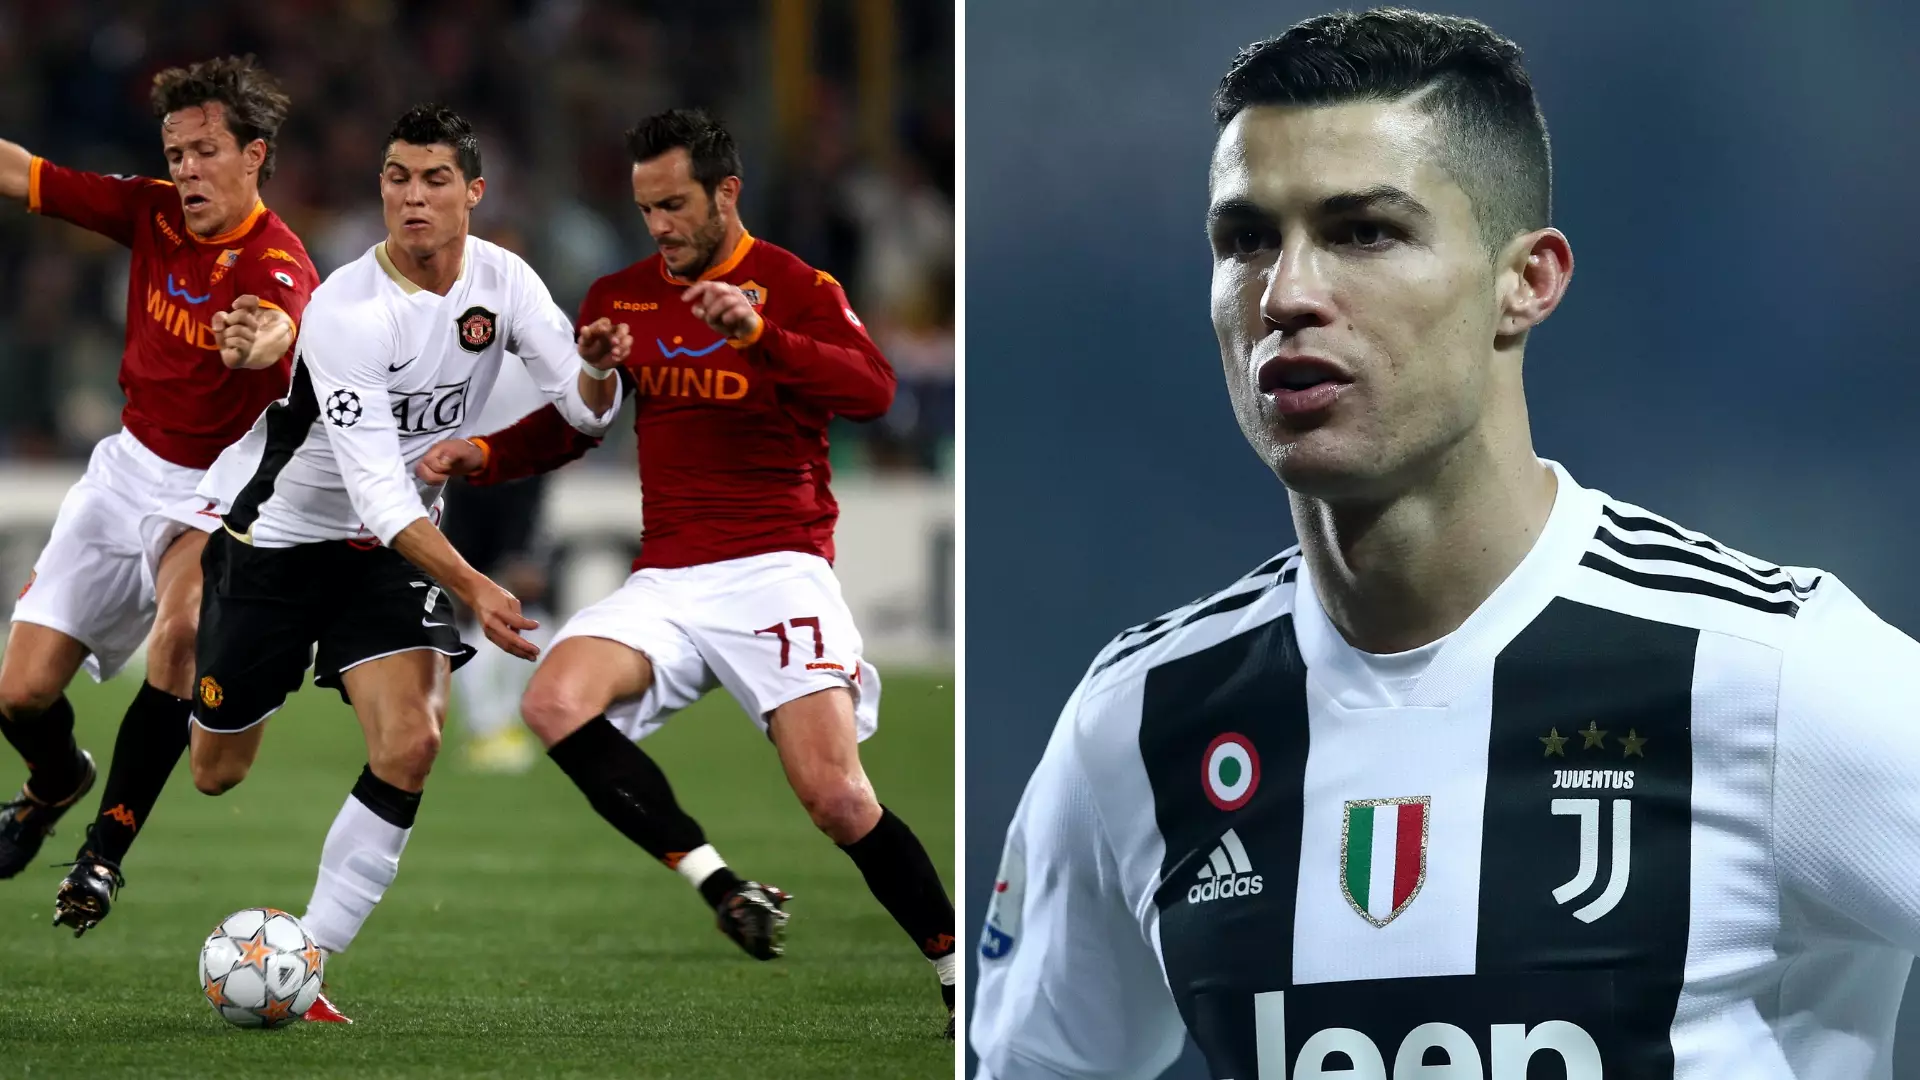 Roma Players Begged, Threatened Cristiano Ronaldo During Manchester United’s Champions League Clash